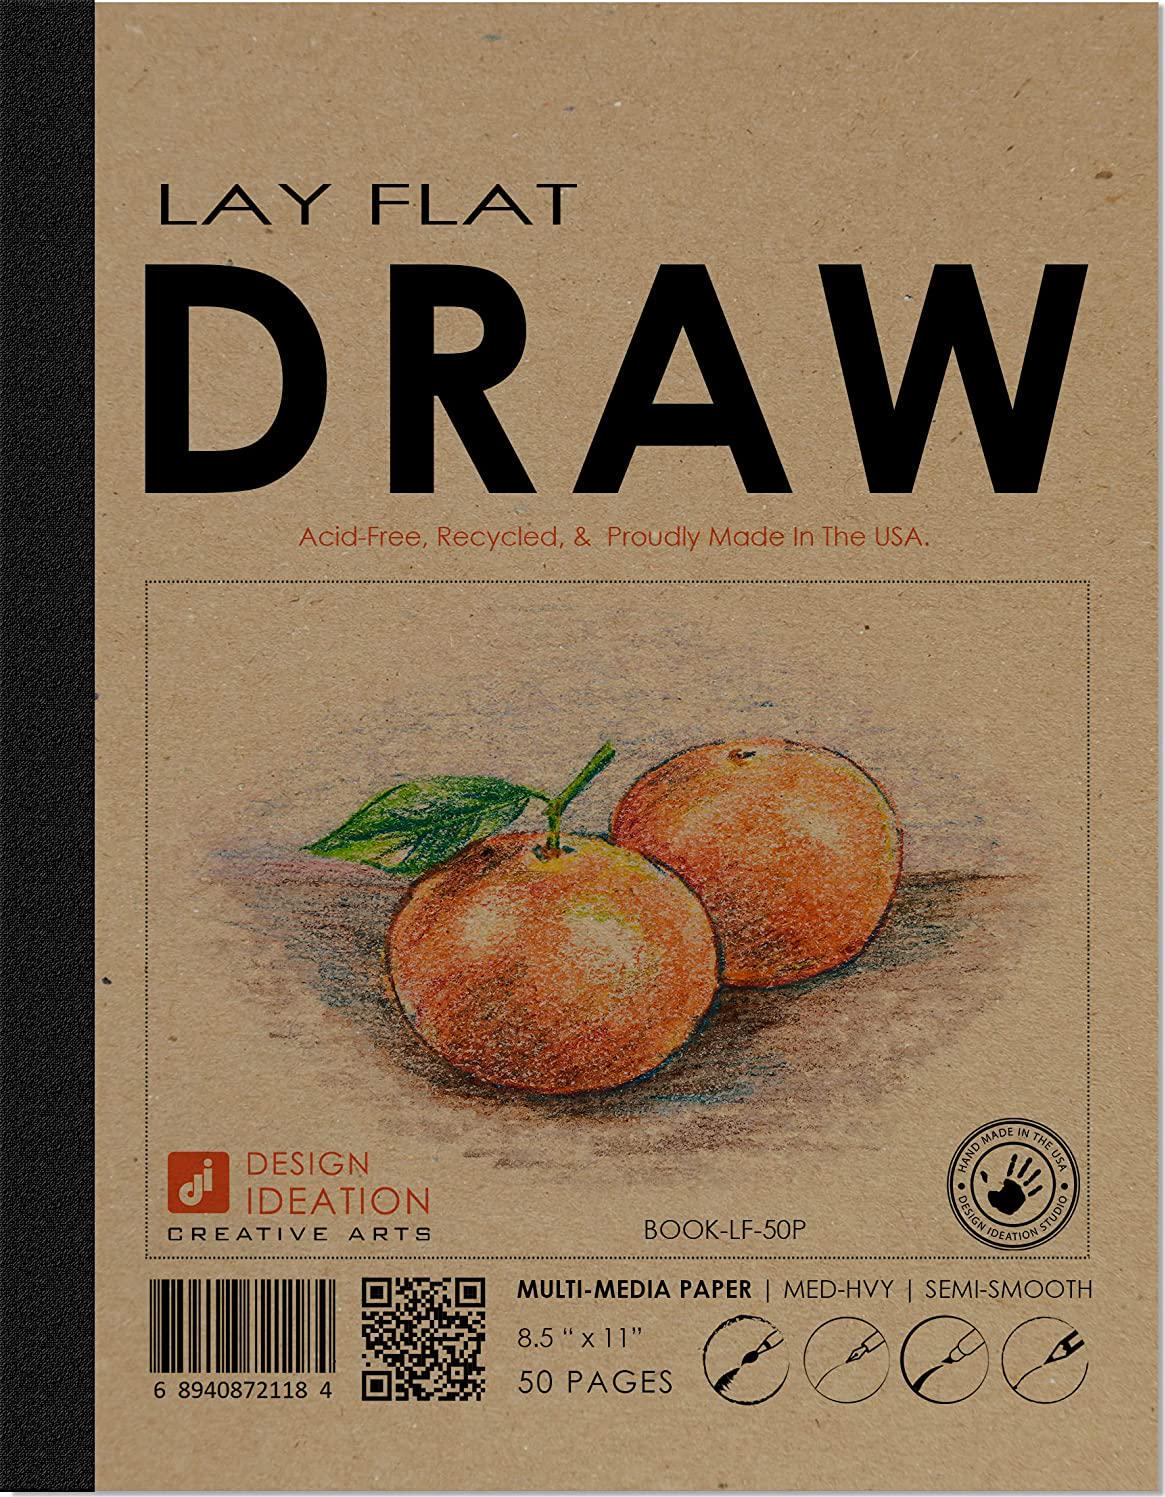 Design Ideation, Lay Flat : Premium Paper Multi-Media Drawing Book for Pencil, Ink, Marker, Charcoal and Watercolor Paints. Great for Art, Design and Education. (8.5 x 11 )